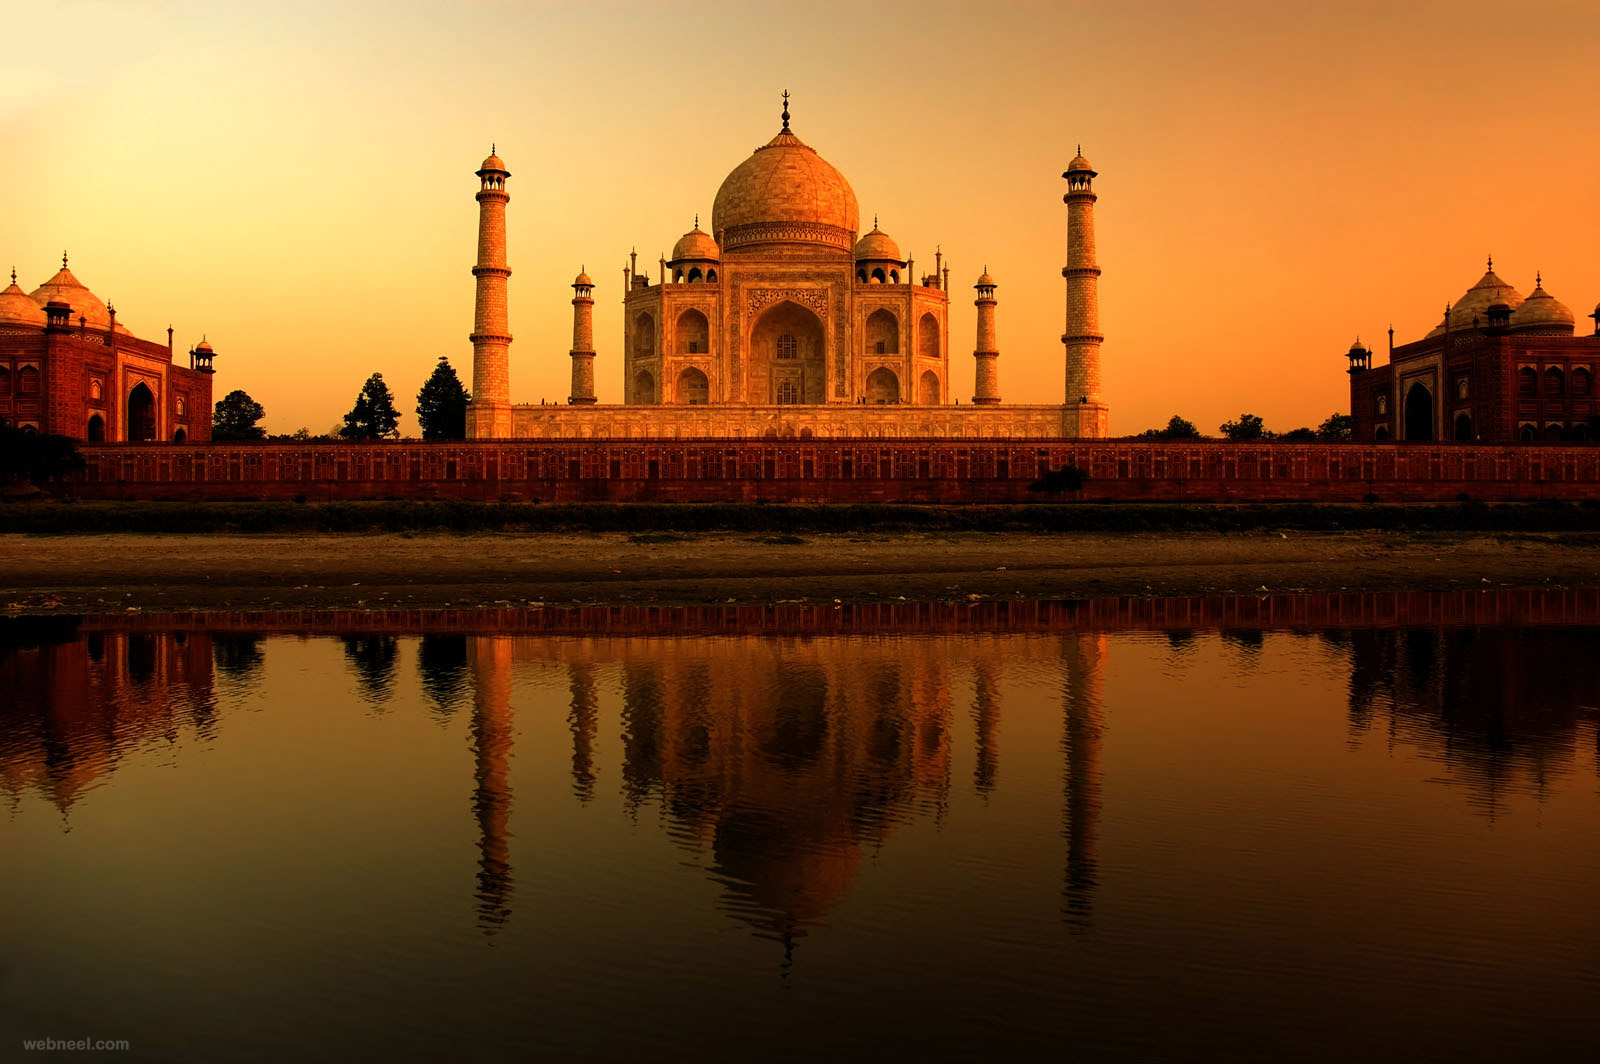 25 Beautiful Taj Mahal Photos - Most photographed building in the world